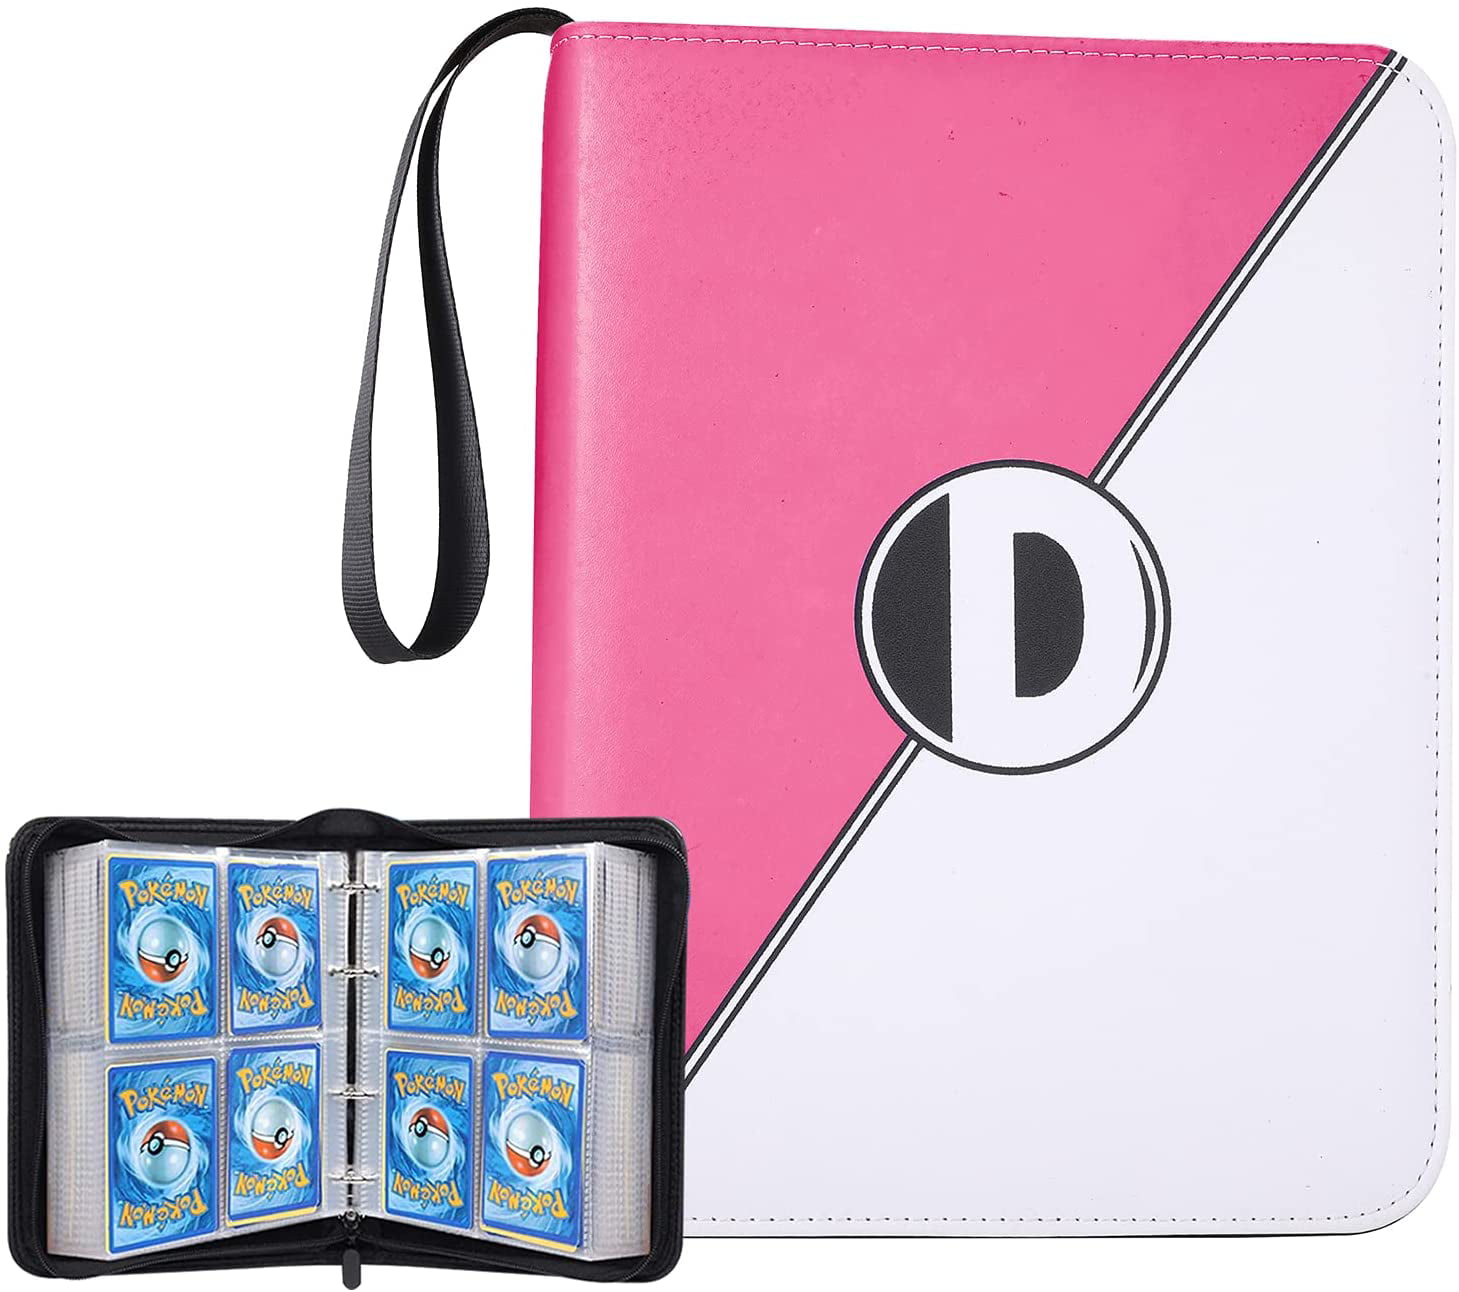 For Pokemon Card Binder Folder 4-Pocket 400 Pockets with 50 Removable Sleeve Included fit 400 Trading Cards for Pokemon Card Holder Book